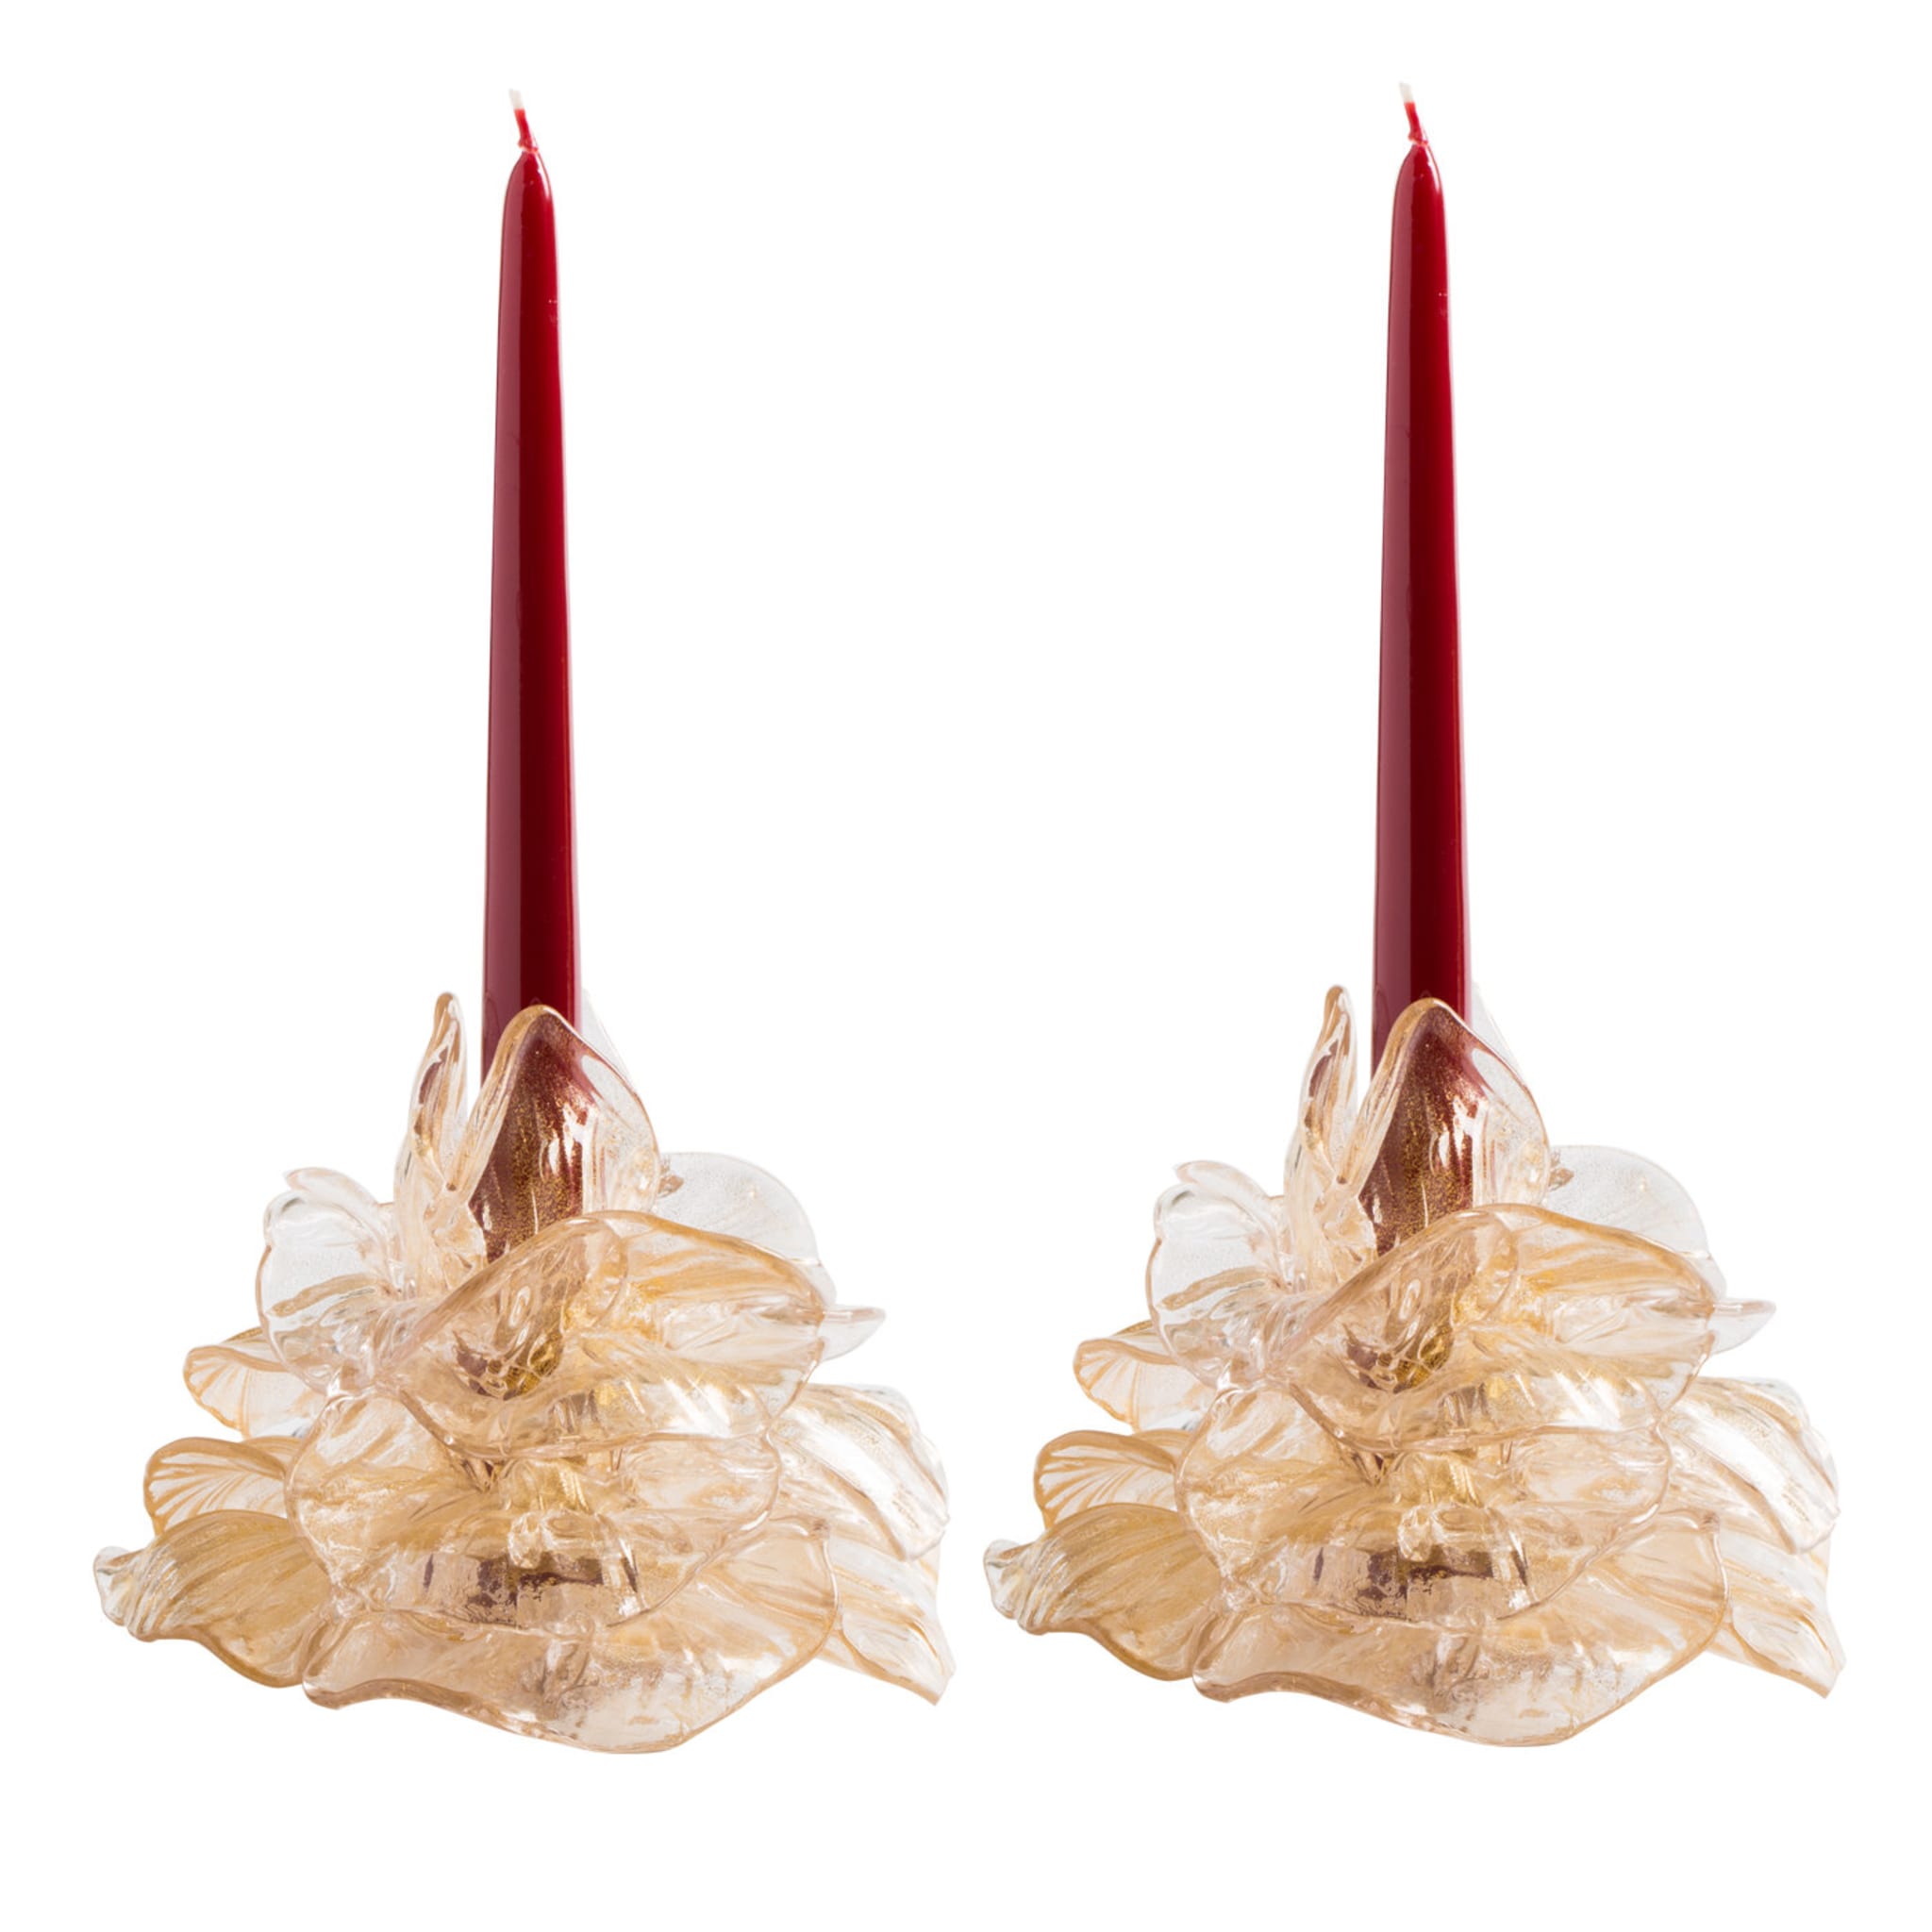 2 Gold Rose Candle Holders - Main view